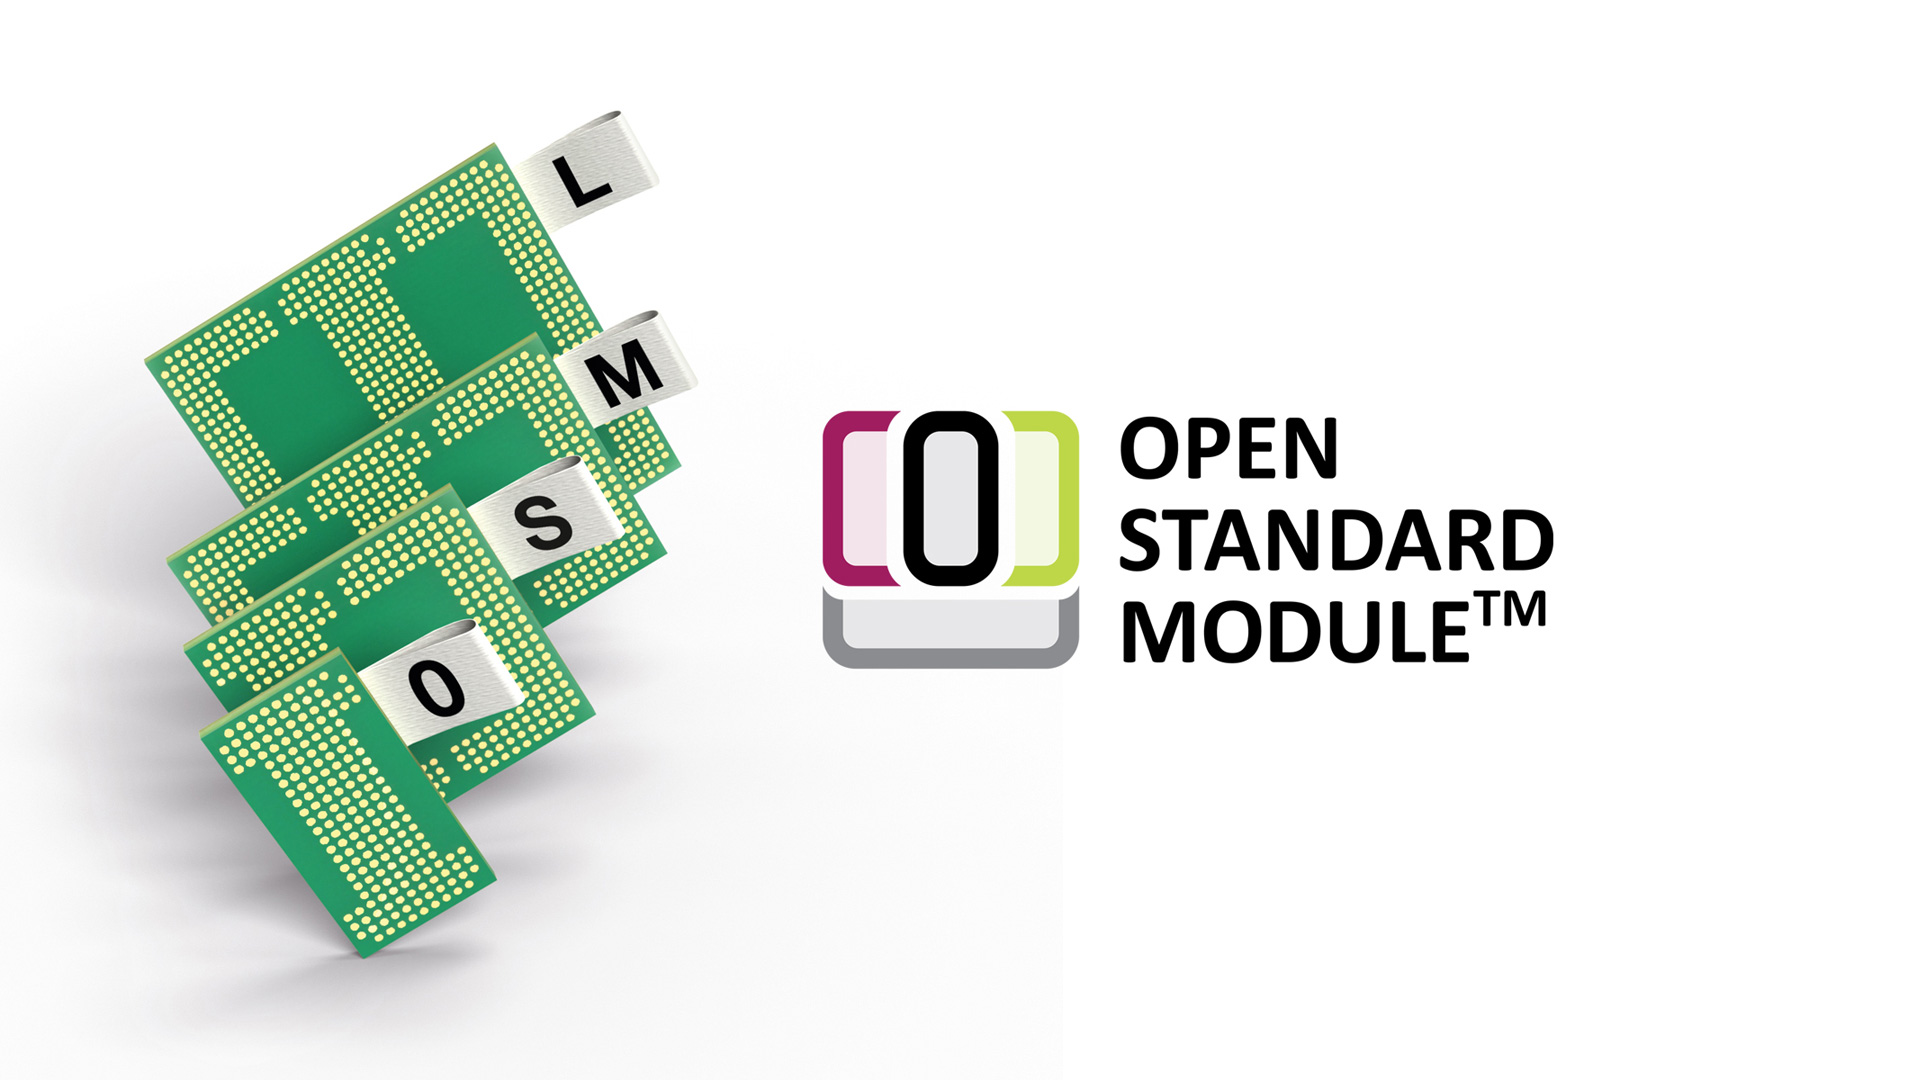 Open Standard Modules in Sizes 0, S, M and L